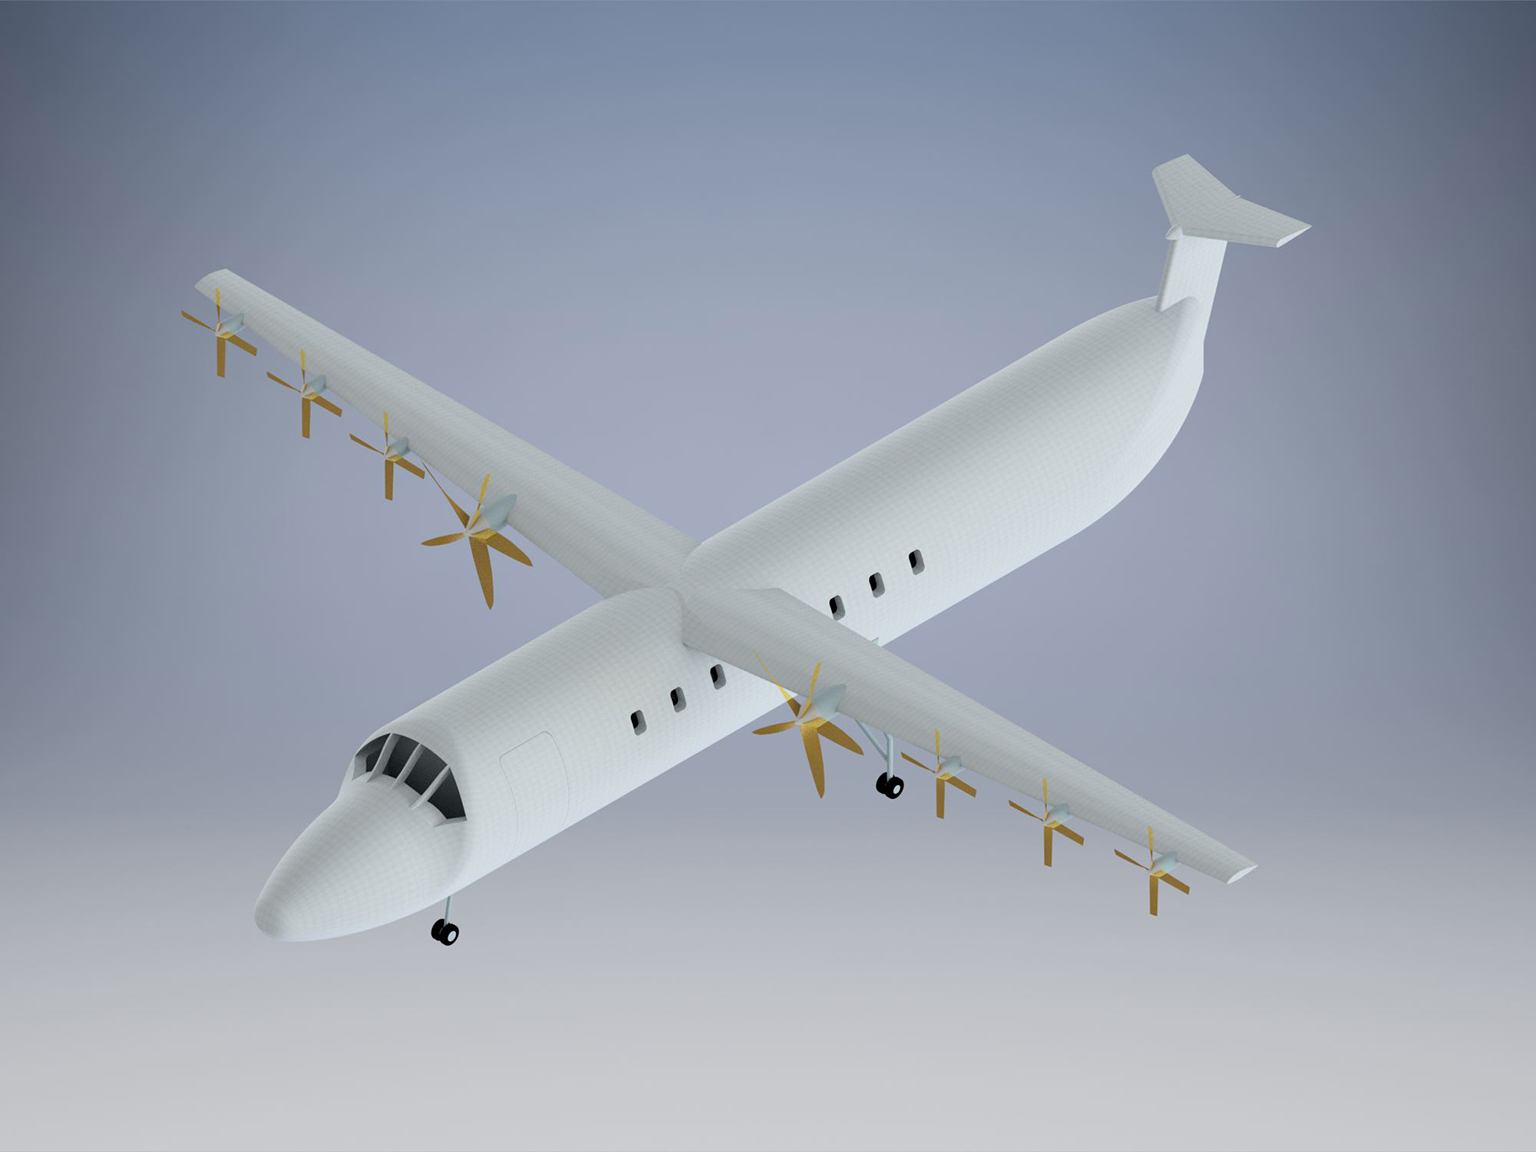 Artist concept of the PartiorQ-1 electric aircraft from Virginia Tech.